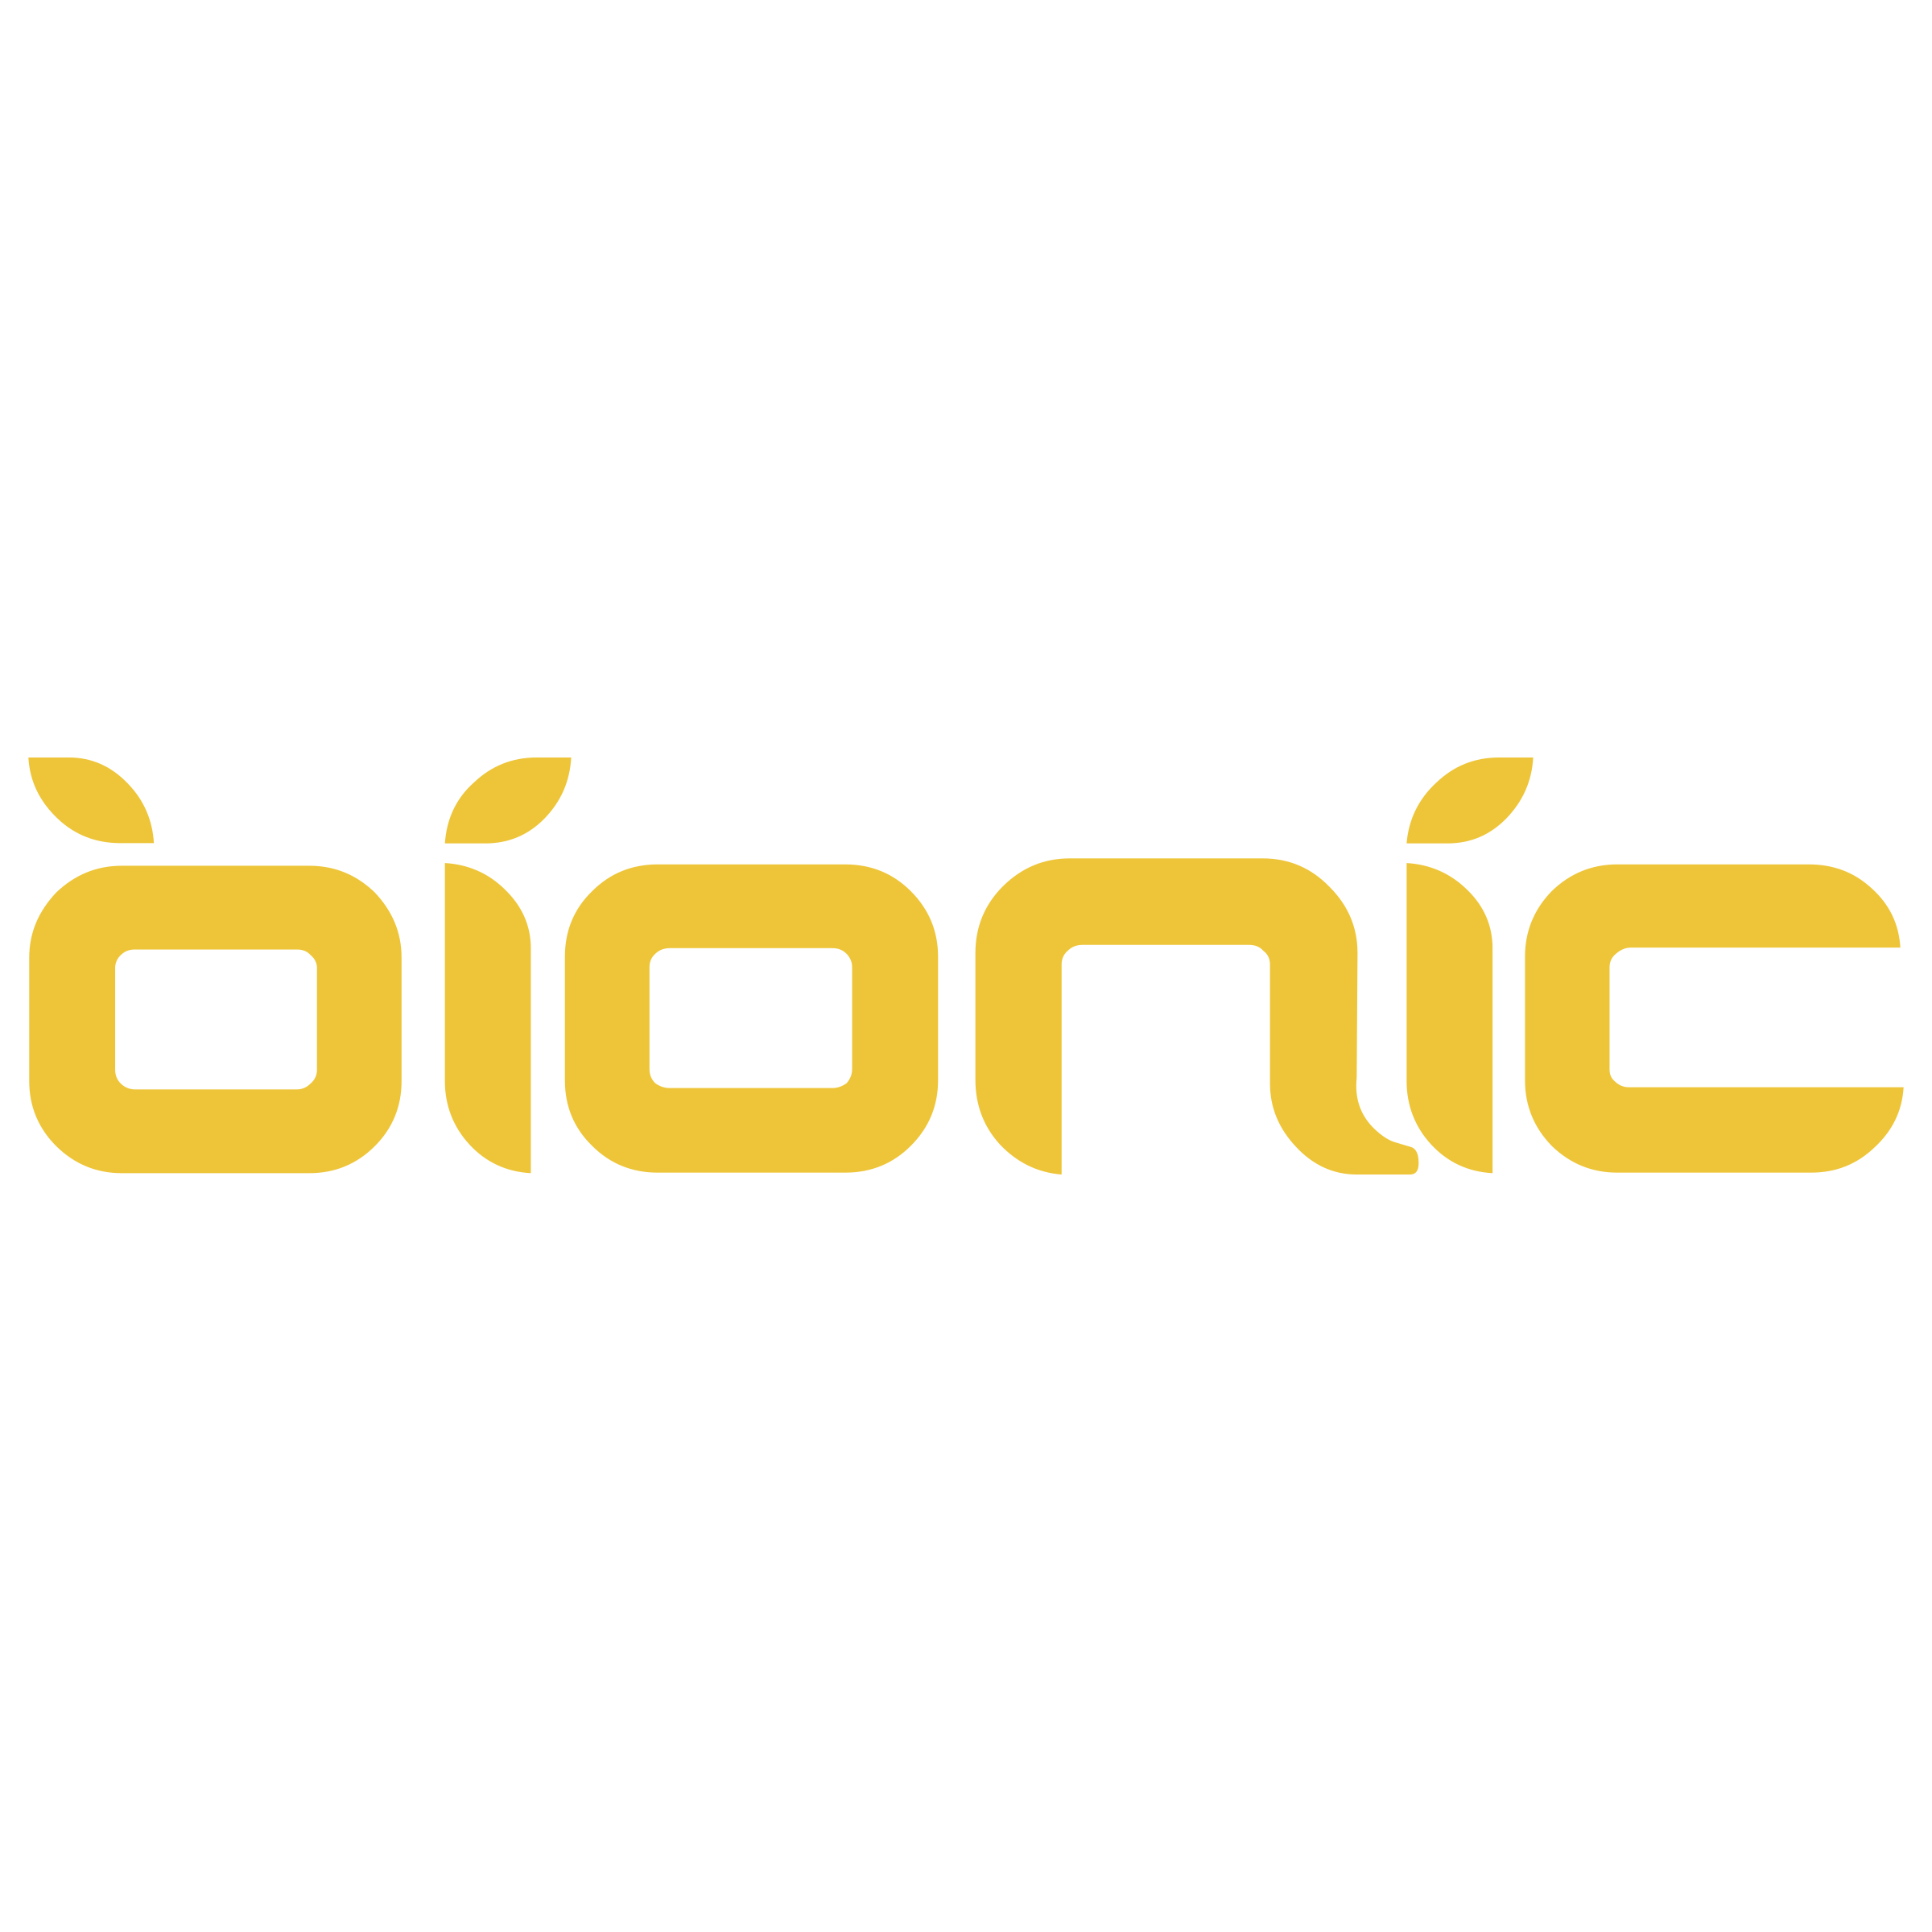 Bionic Logo - Bionic Systems 01 Logo PNG Transparent & SVG Vector - Freebie Supply